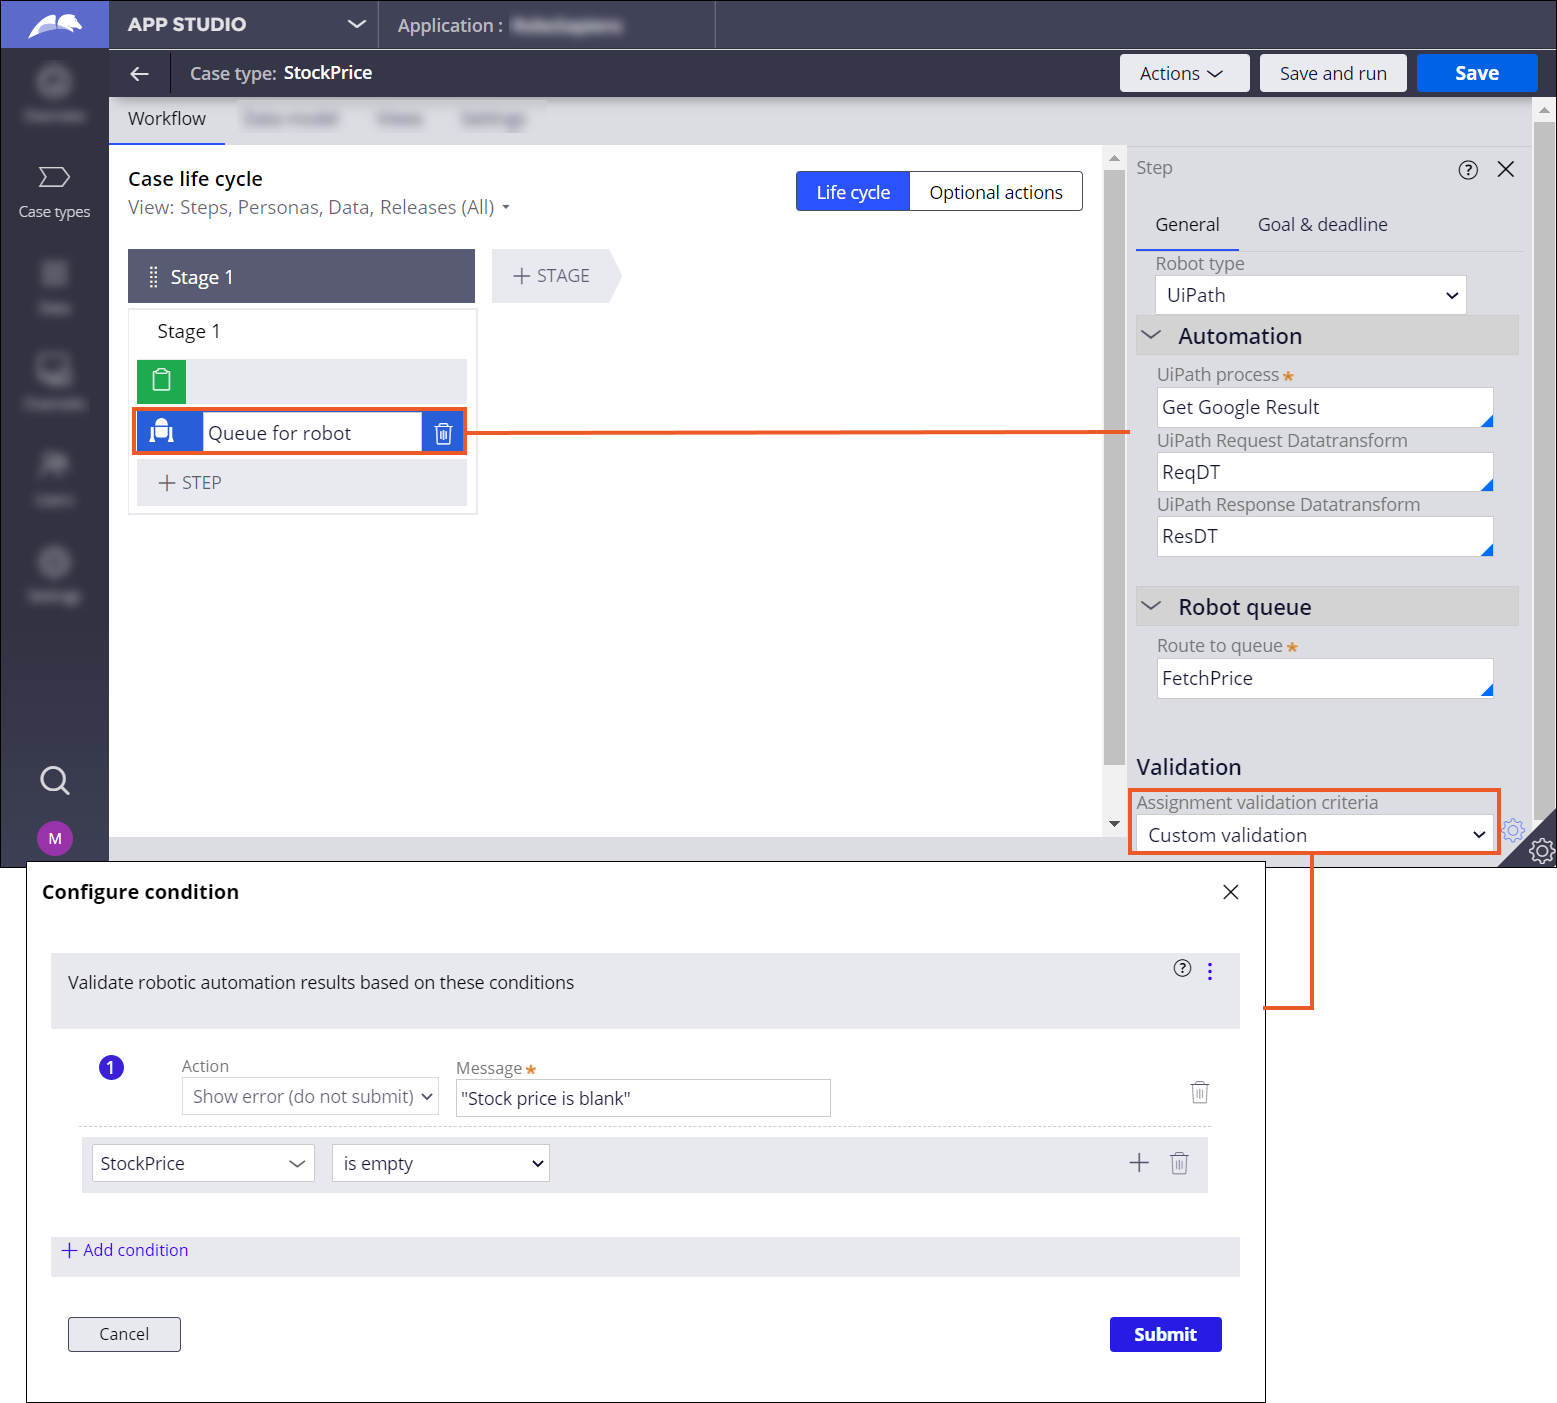 You can assign tasks to a robotic queue and configure how your application validates the automation output